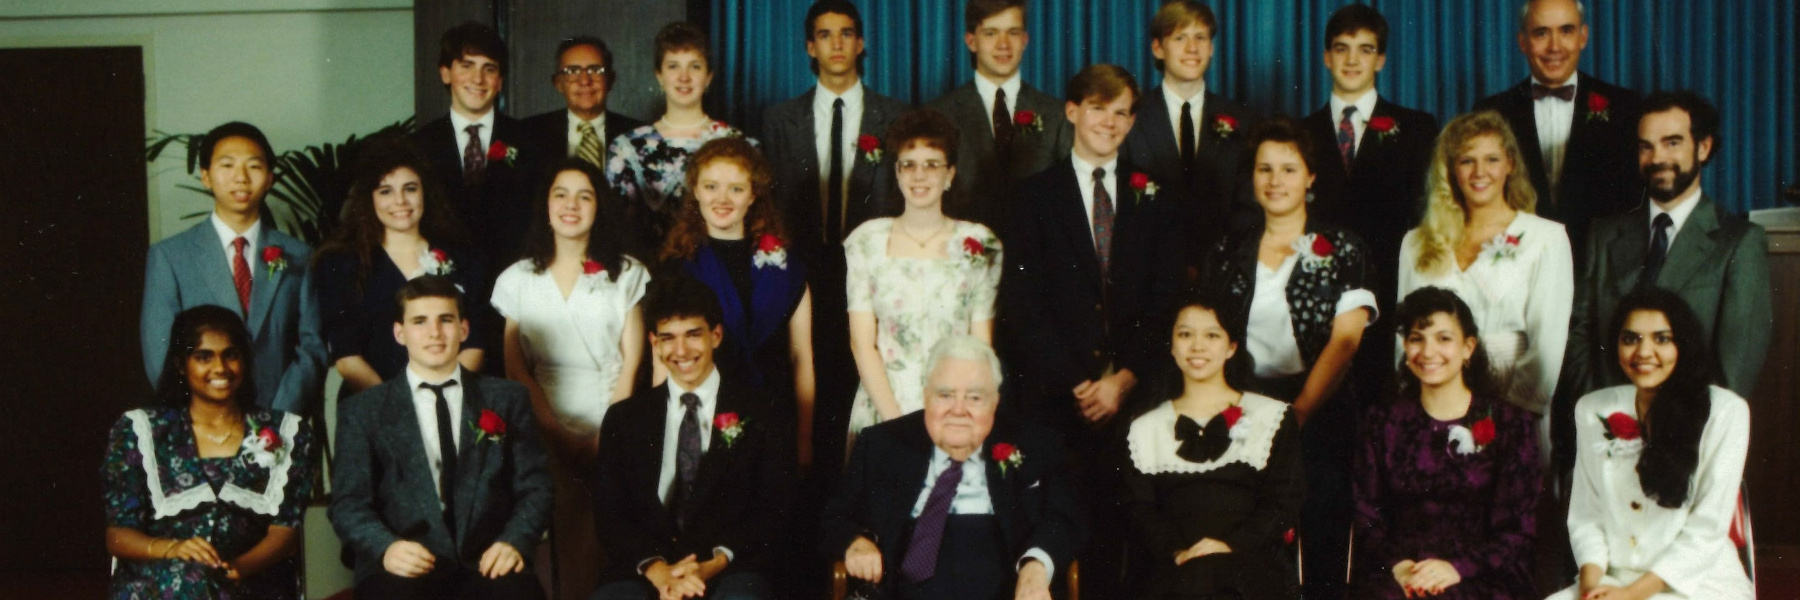 The 1991 class of Wells Scholars in formal attire with Chancellor Wells in the center. 